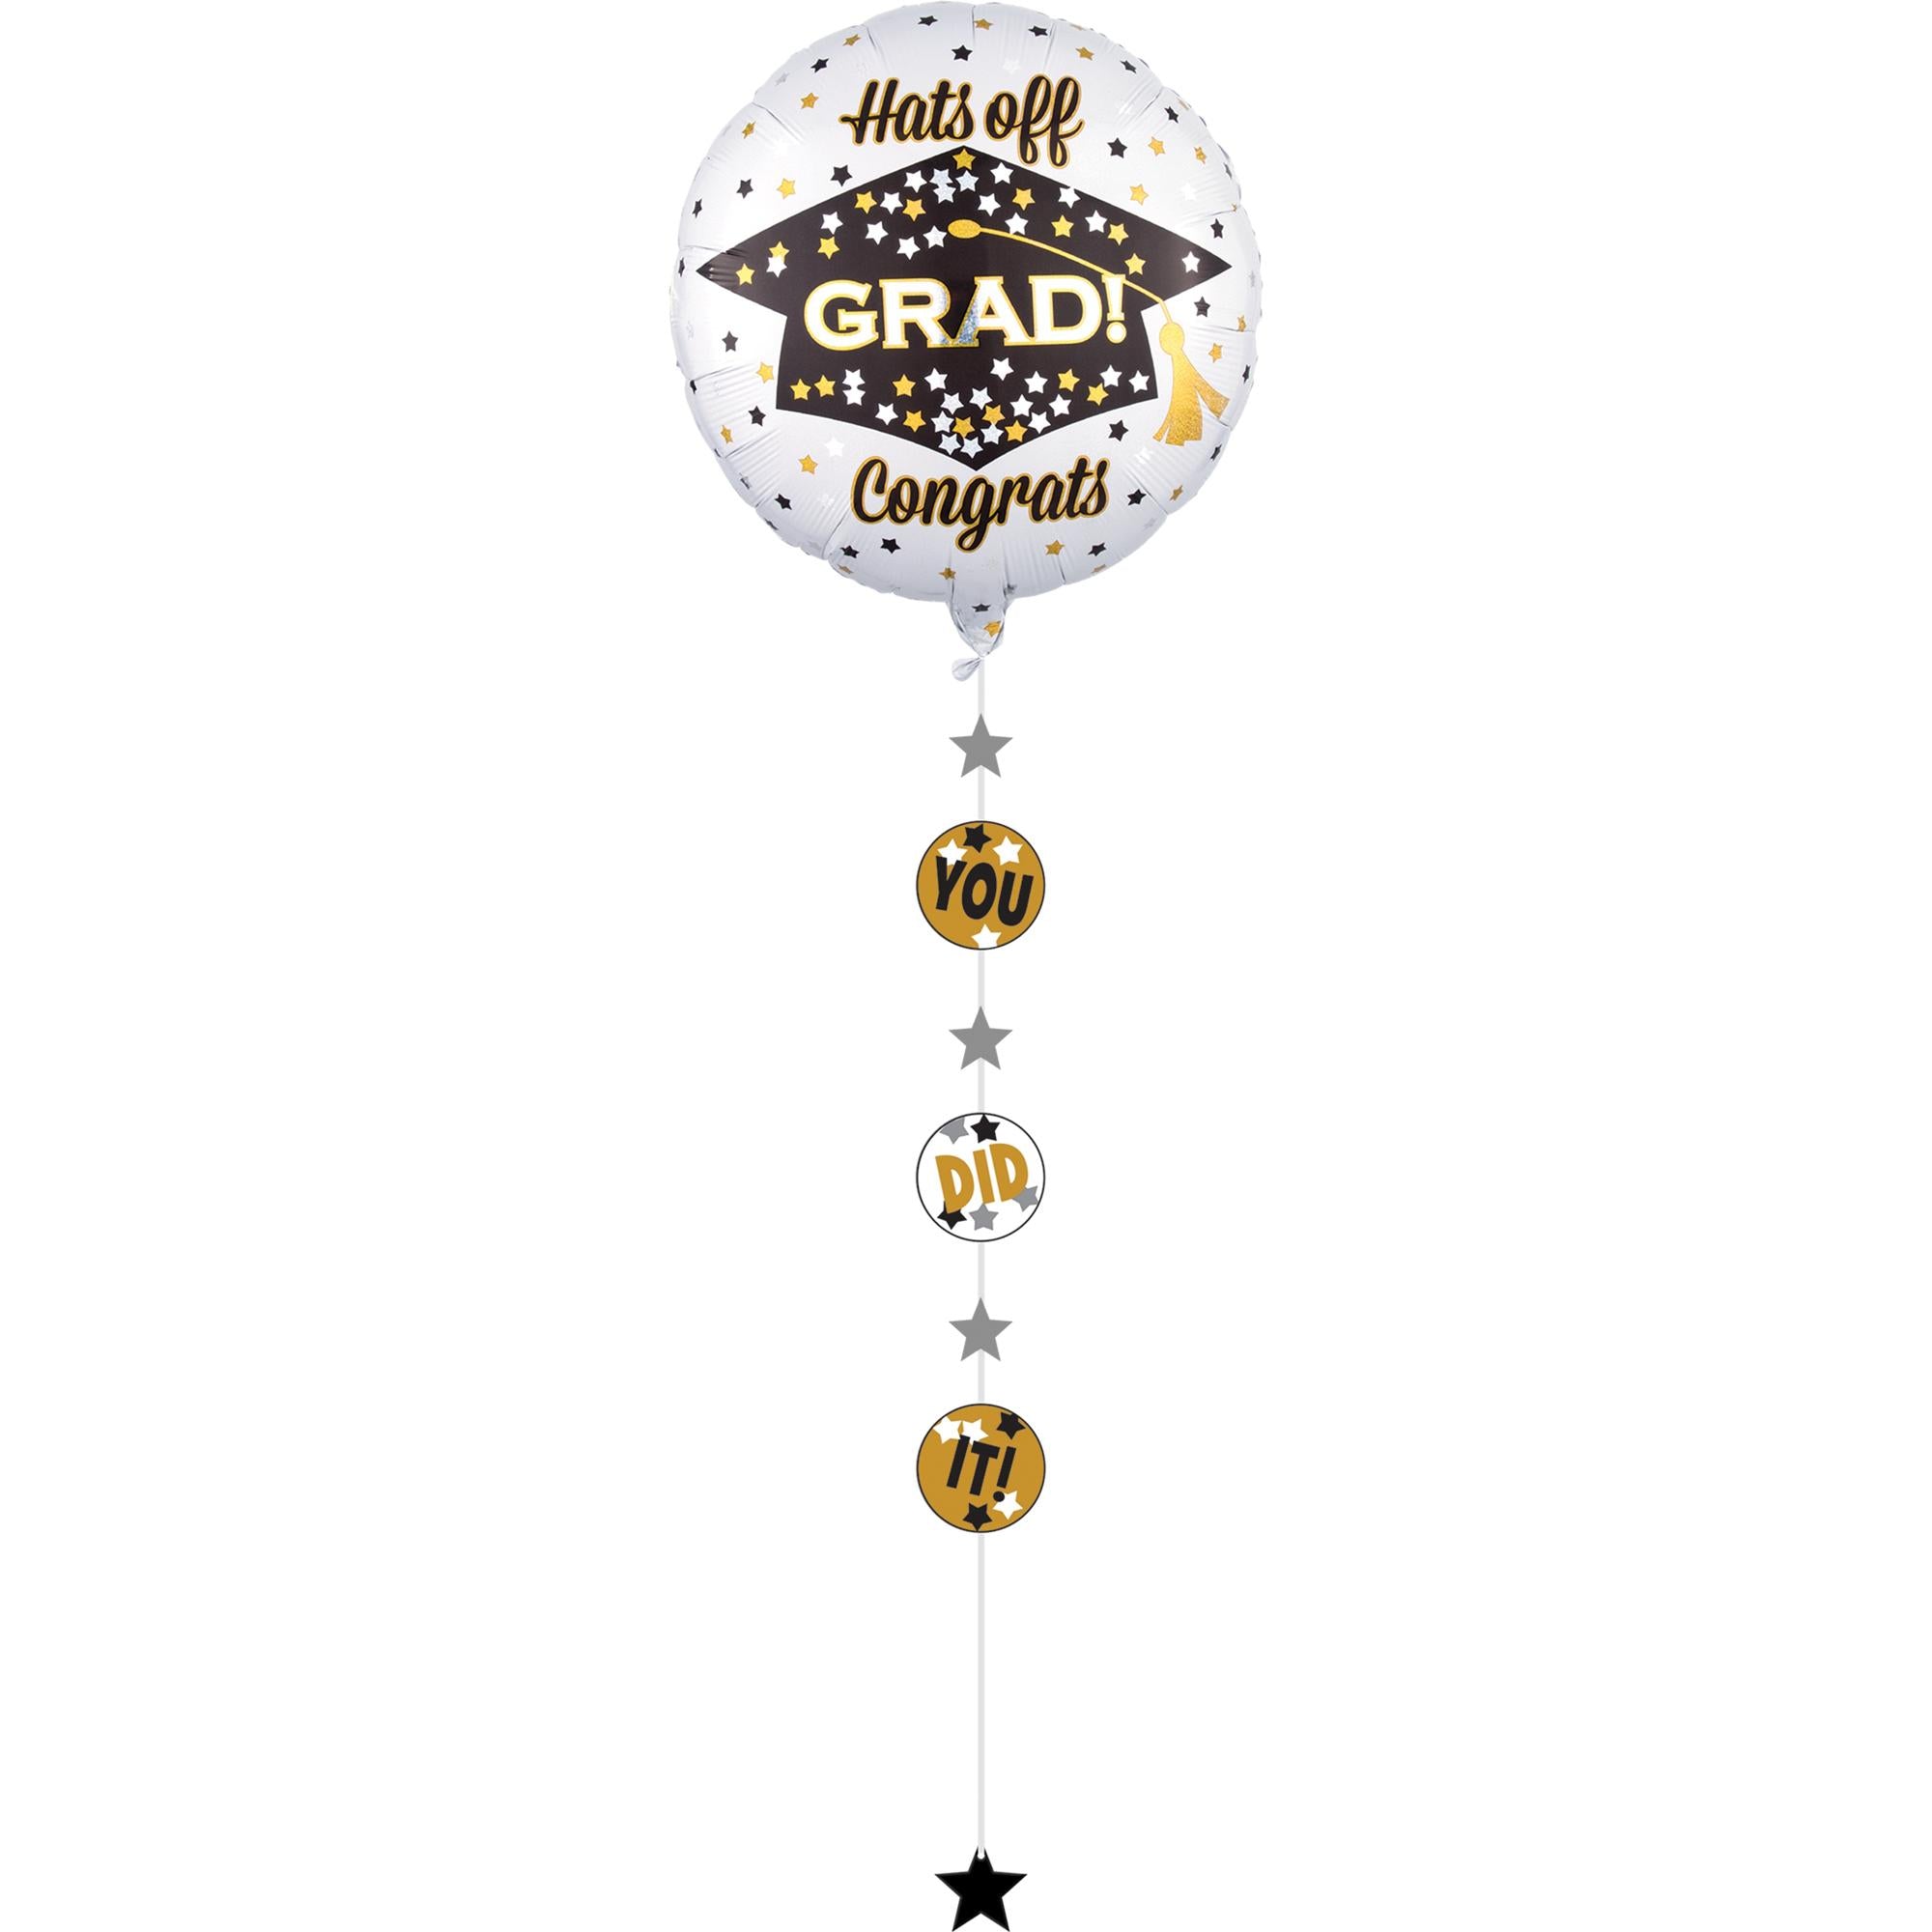 You Did It Graduation Specialty Foil Balloon 81x228cm Balloons & Streamers - Party Centre